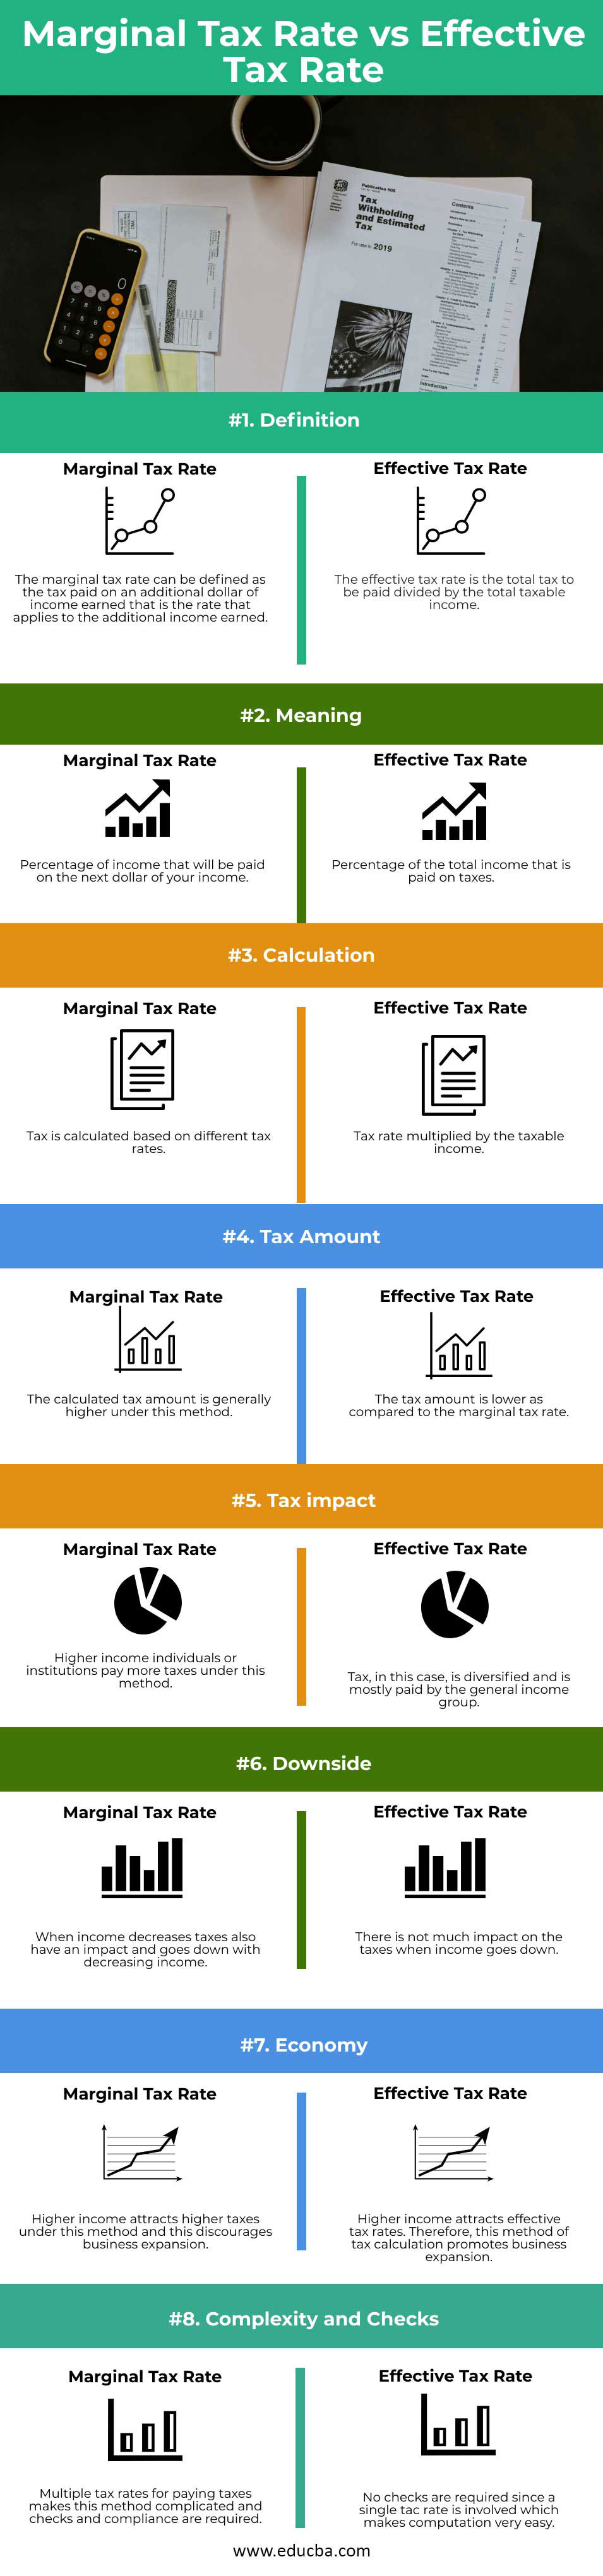 Marginal-Tax-Rate-vs-Effective-Tax-Rate-info